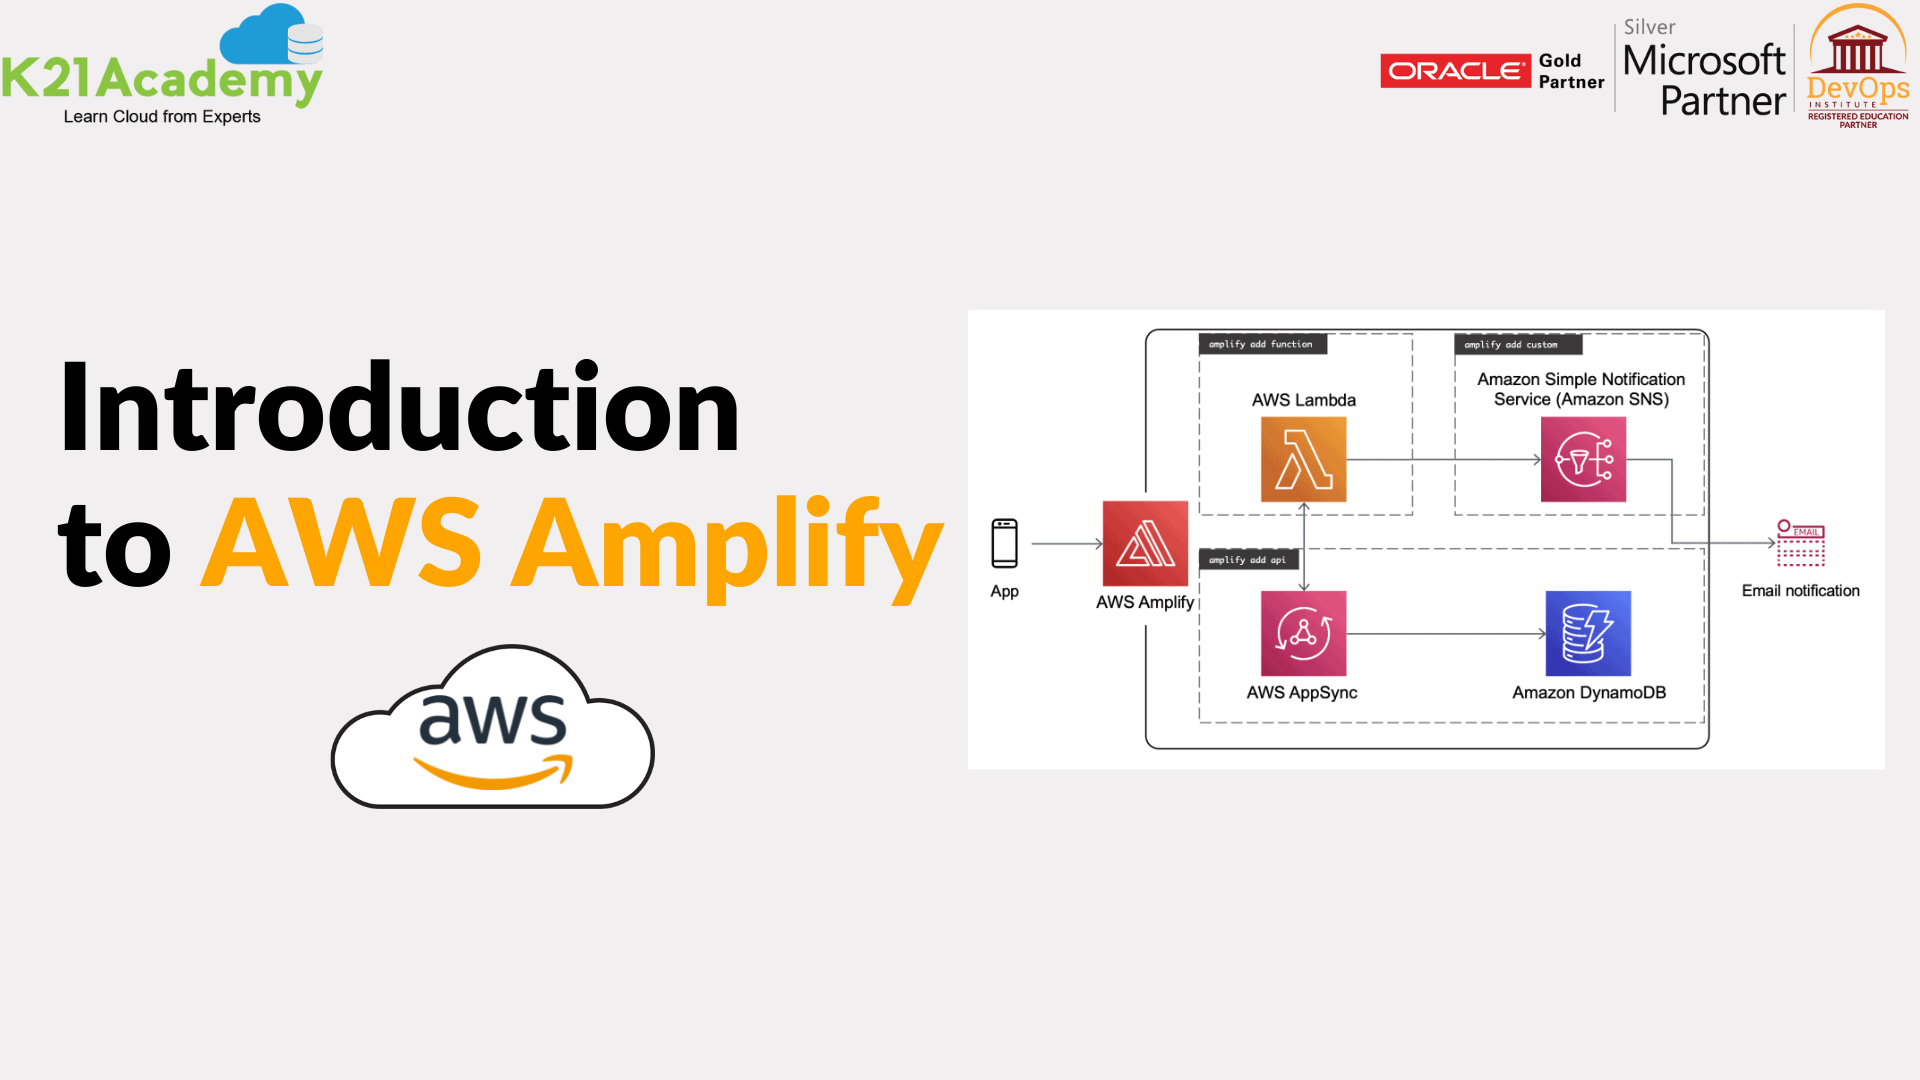 Features of AWS Amplify